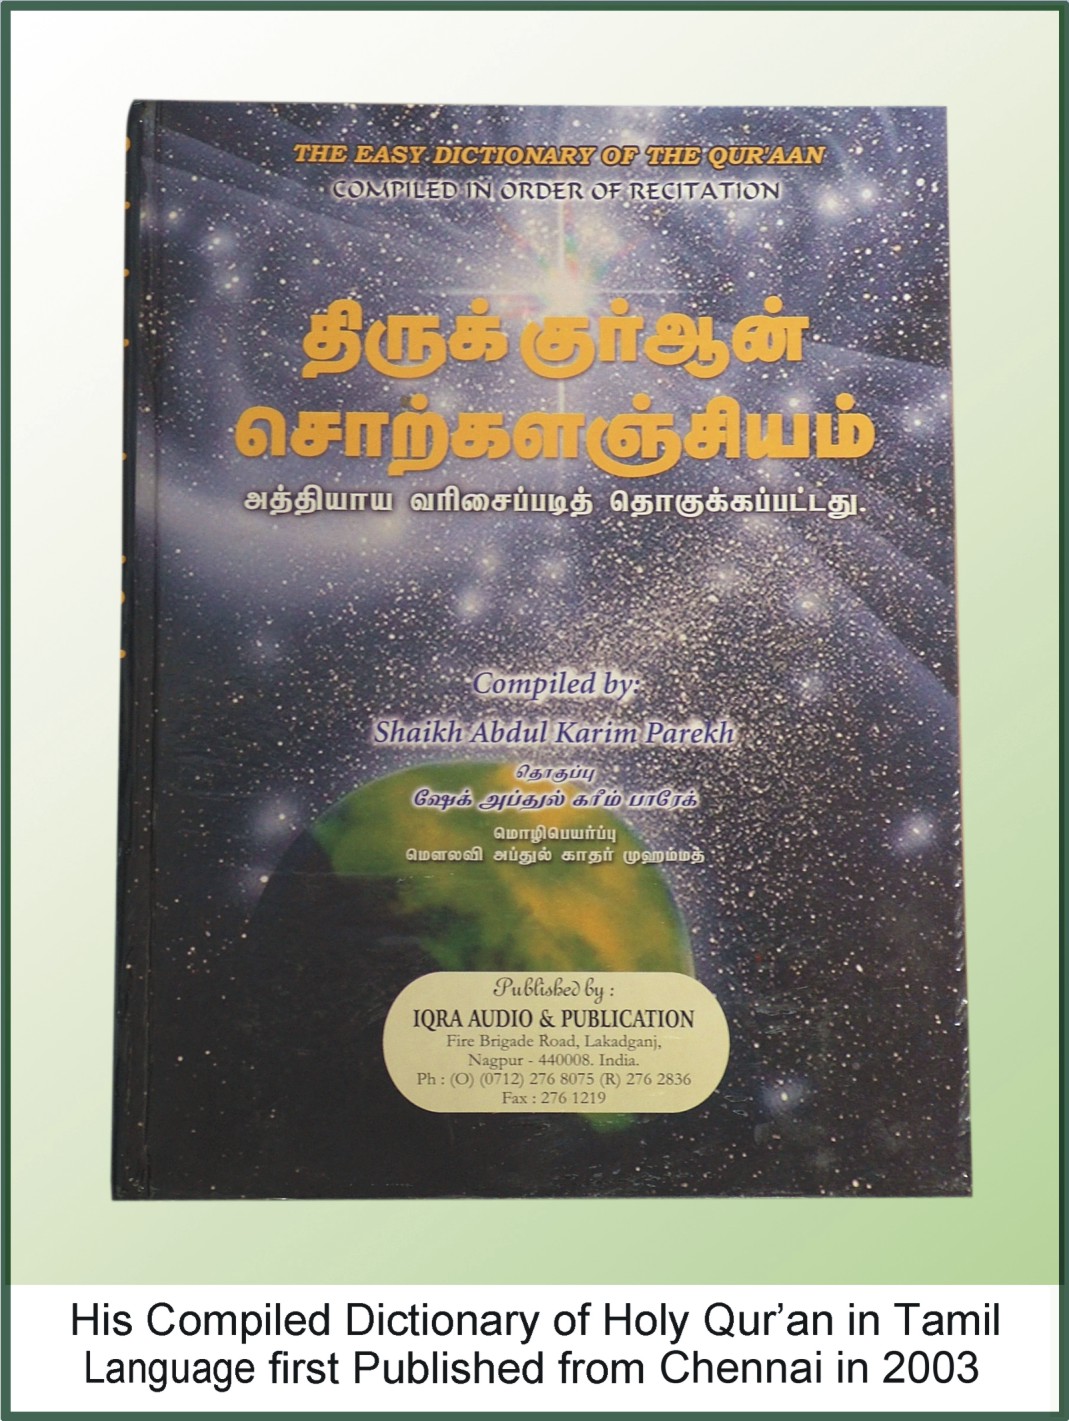 Compiled Dictionary of The Holy Qur'an (Tamil) First Published from Chennai in 2003